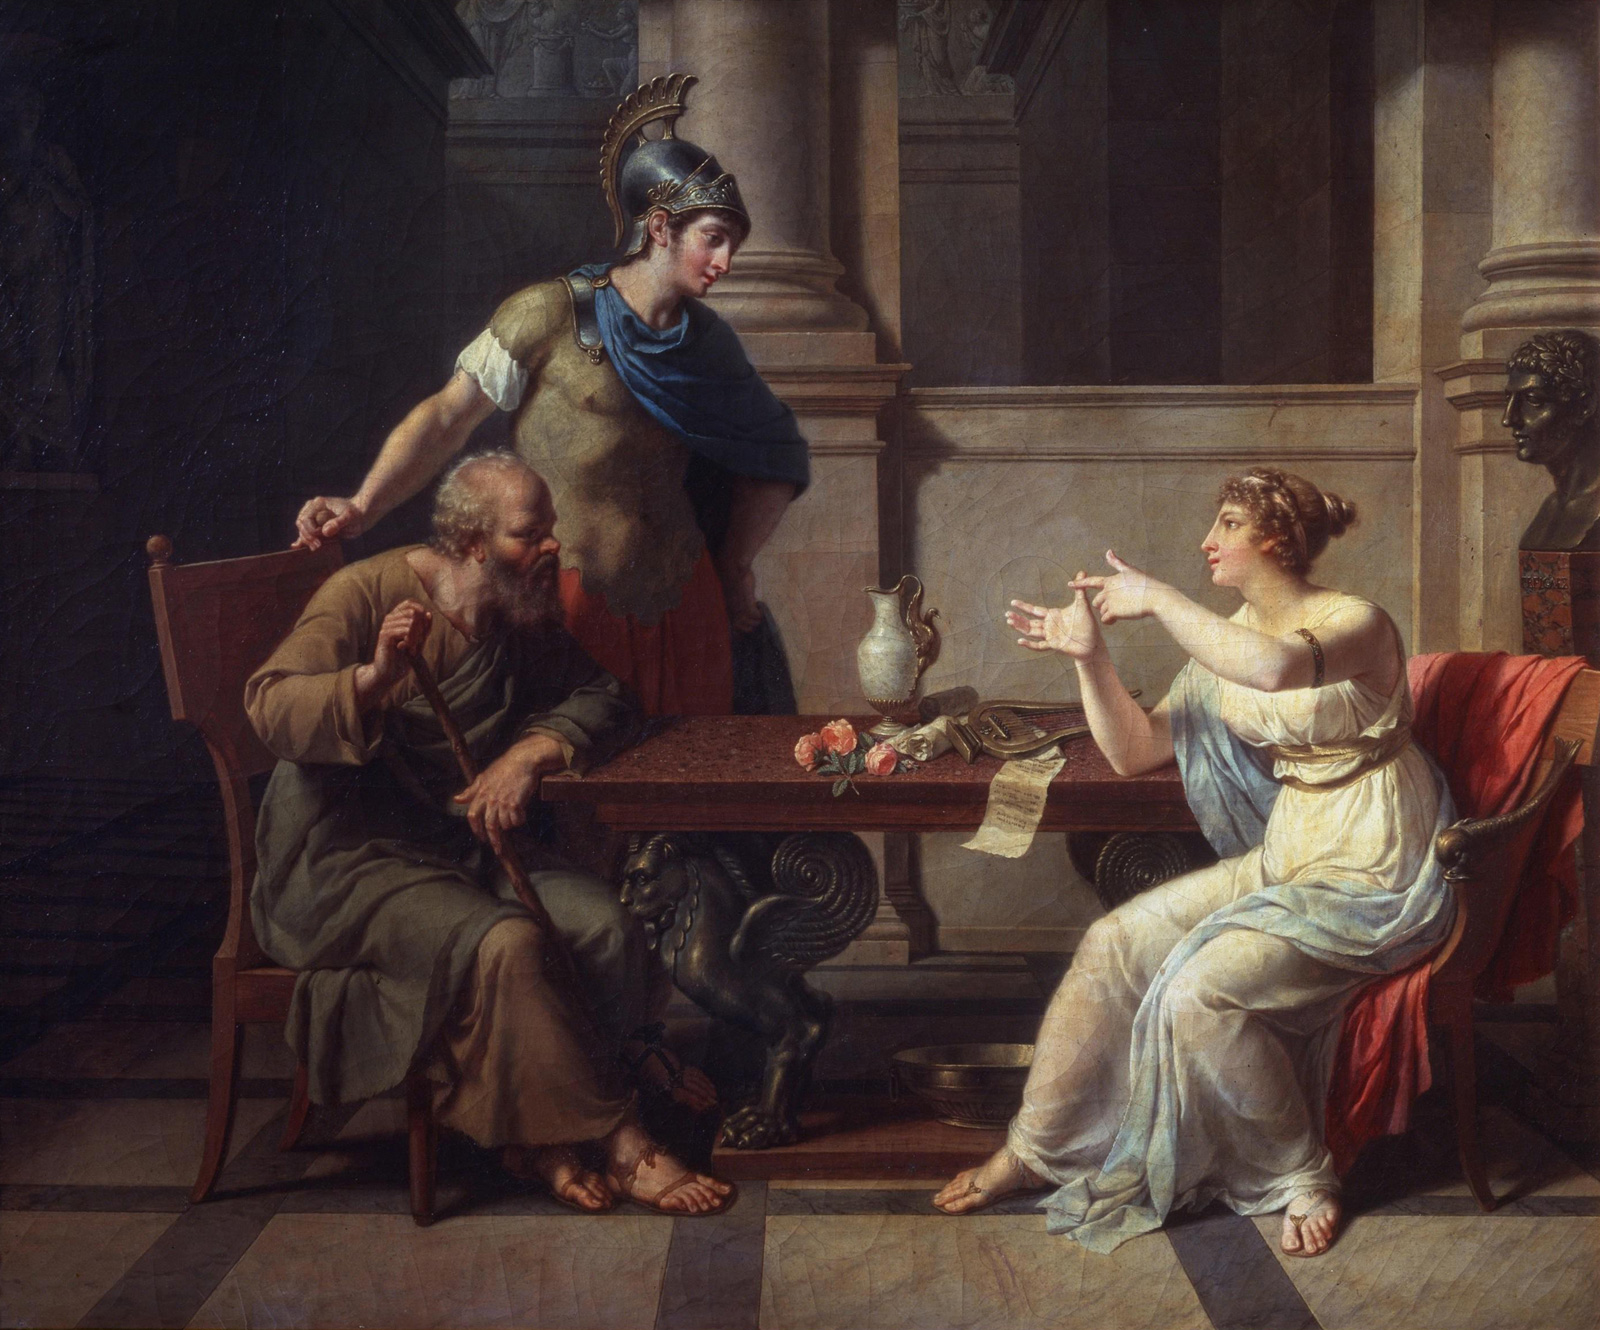 Nicolas Monsiaux, The Debate of Socrates and Aspasia, 1801. Alcibiades is standing next to Socrates.